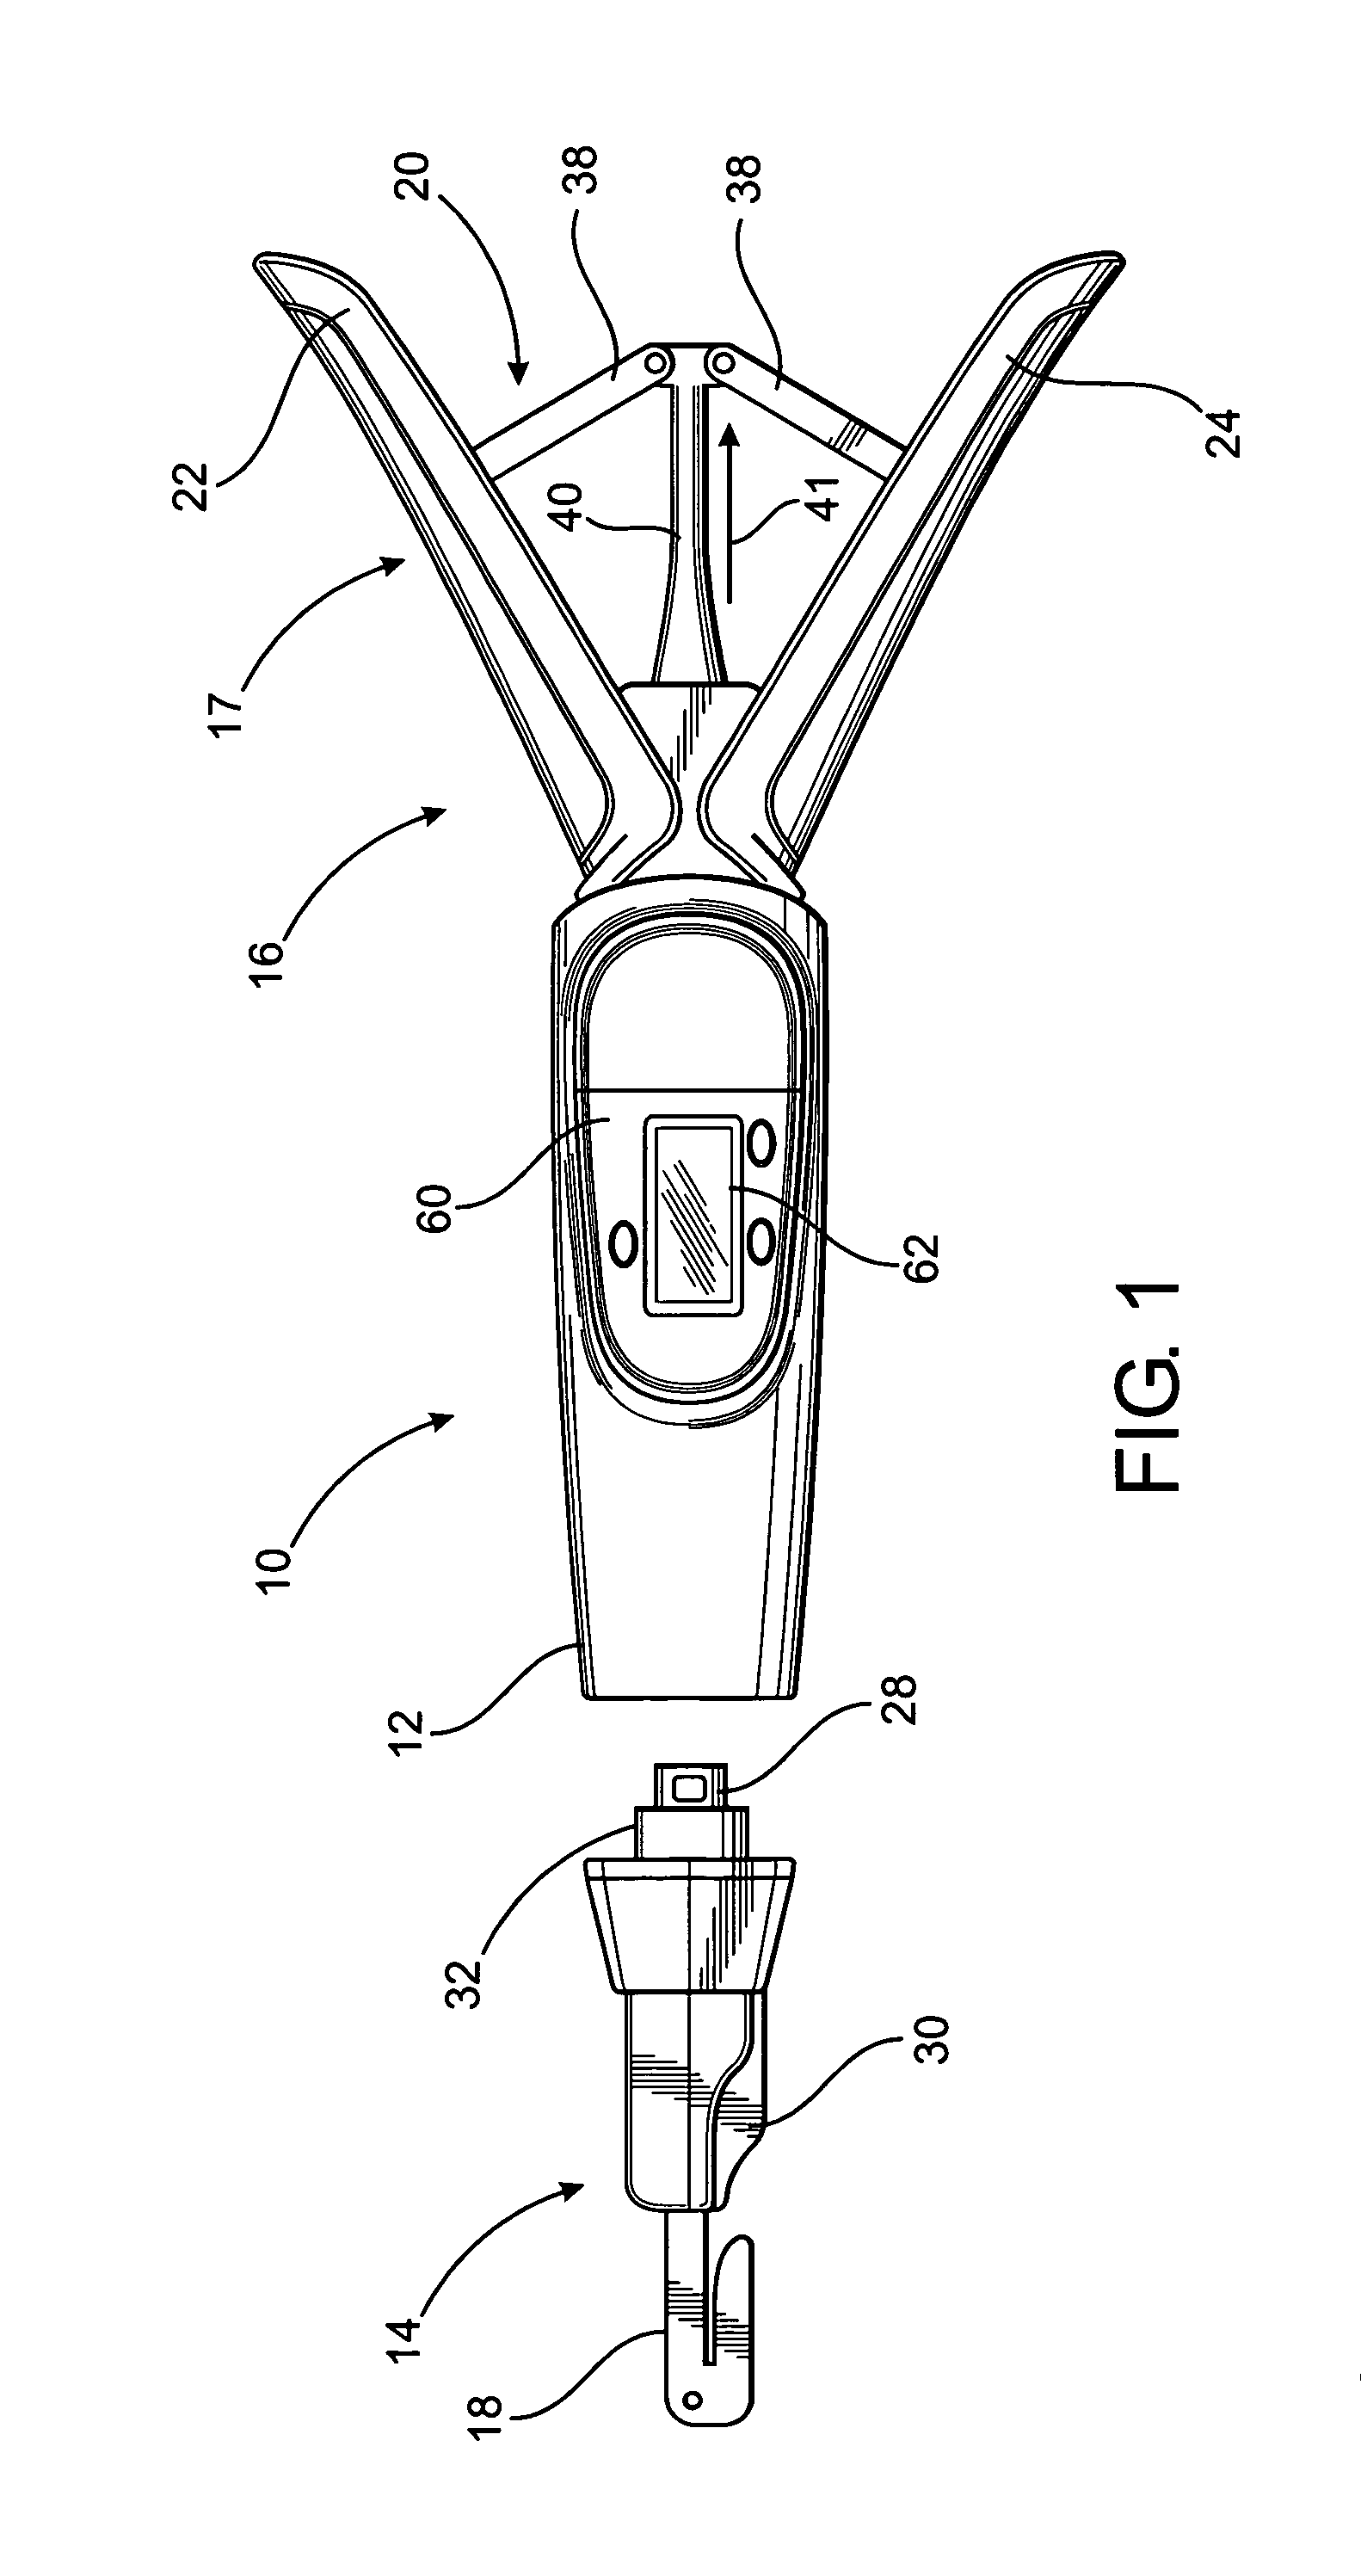 Hair measuring assembly and single use cartridge